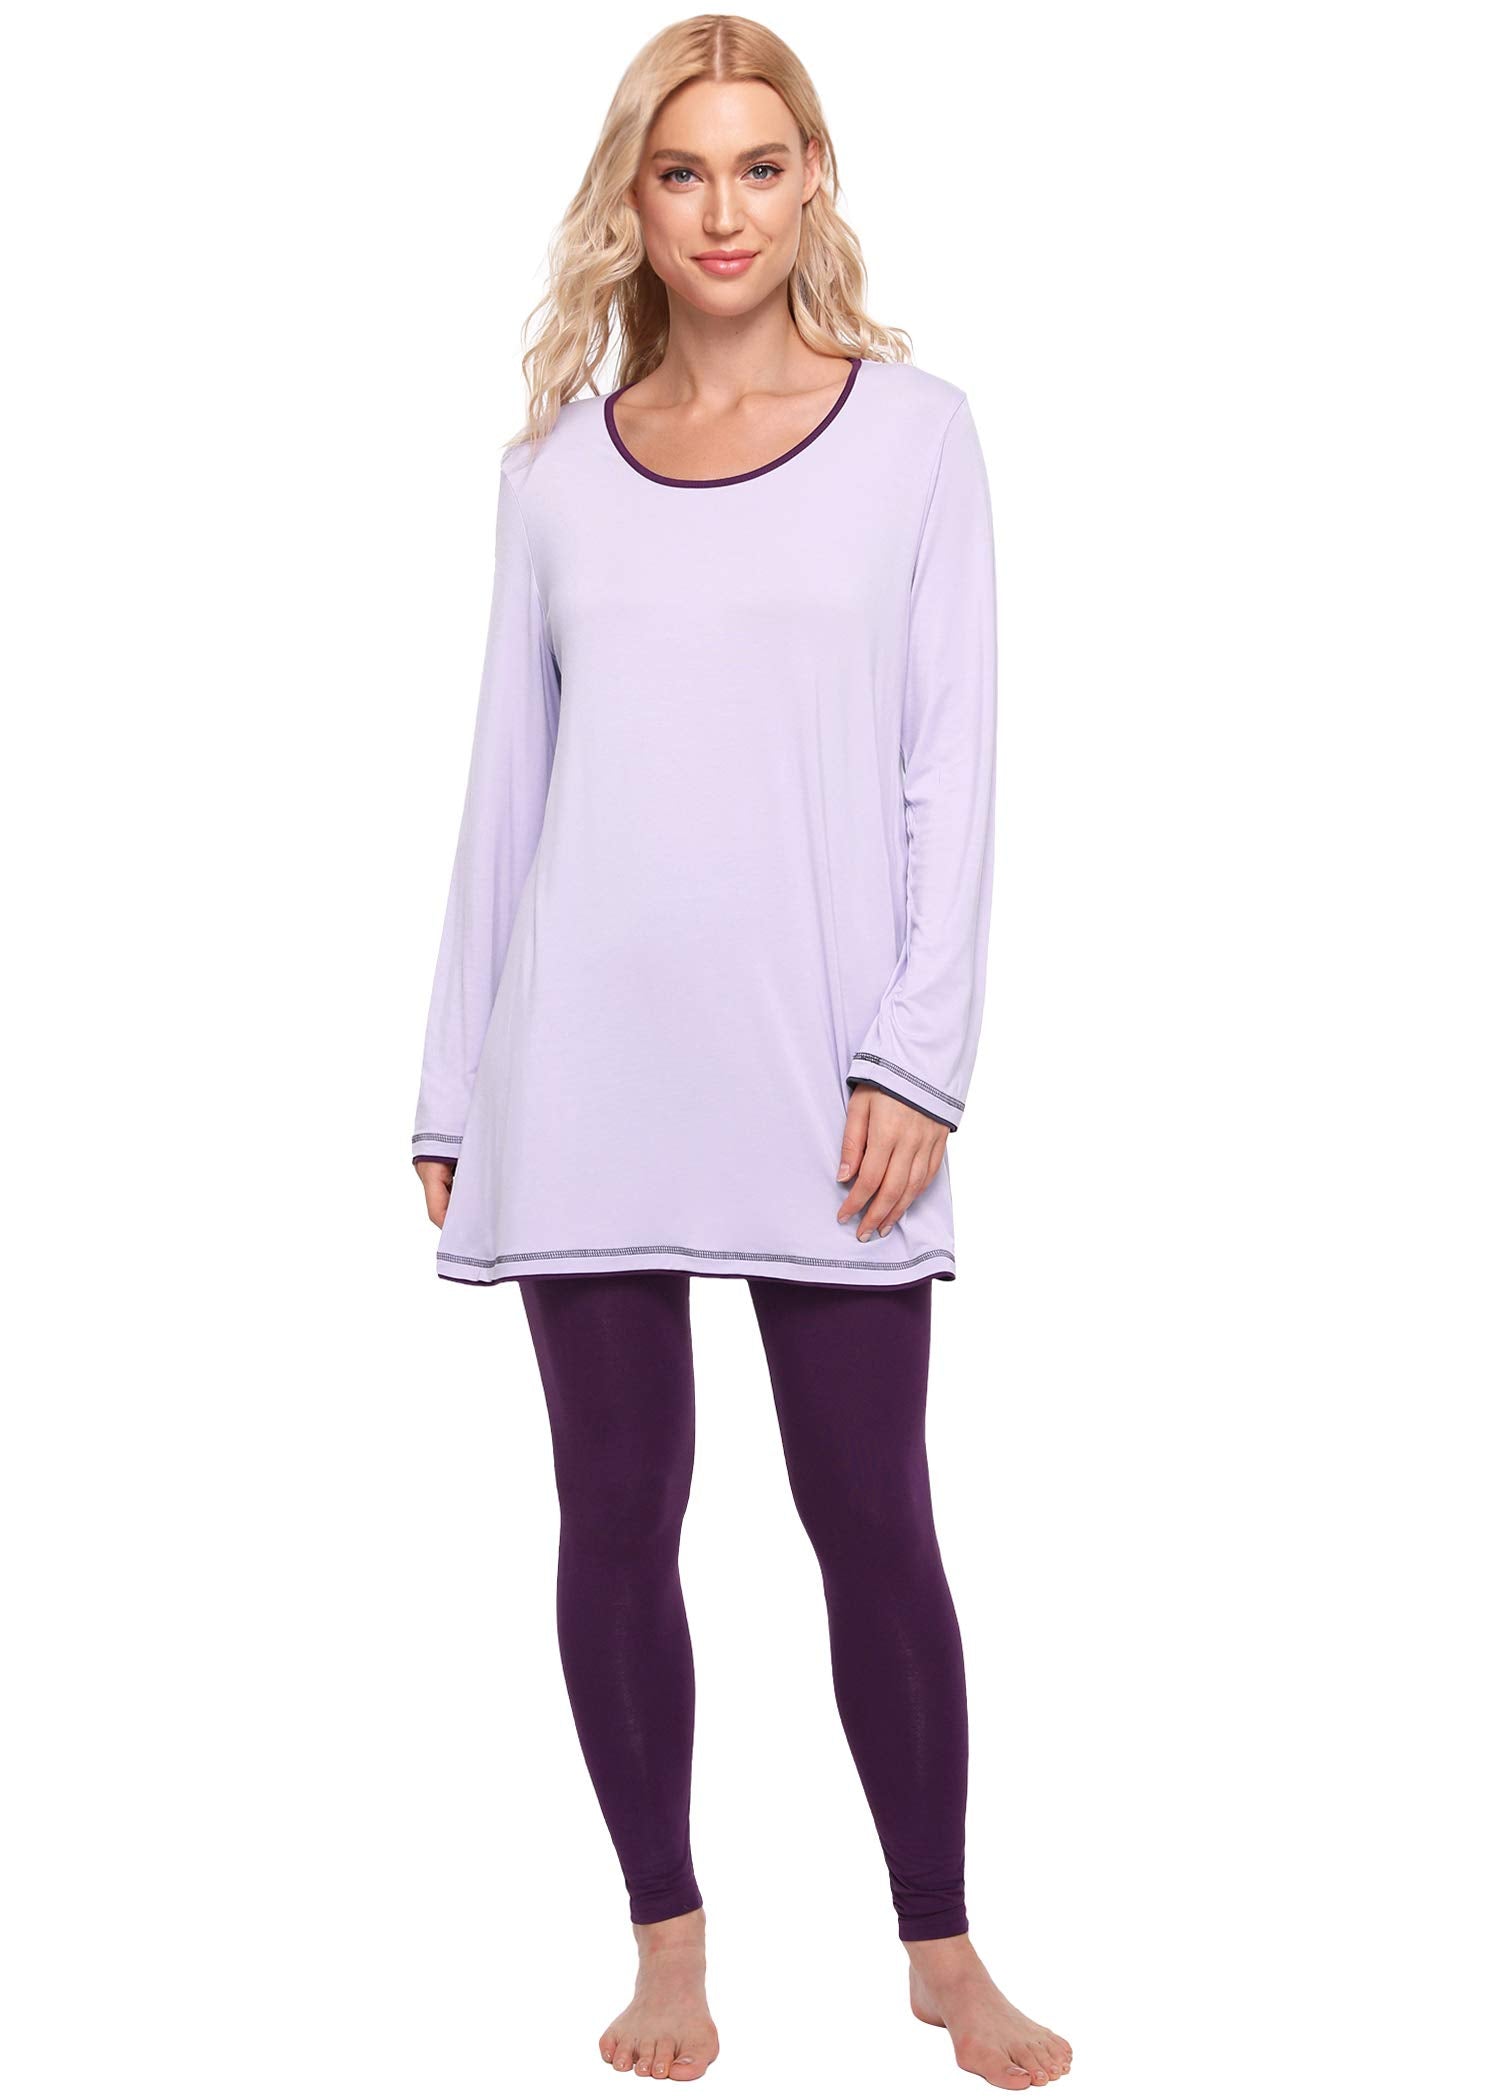 Tunic Tops To Wear With Leggings Fall Clothes For Women Tunics Top For  Leggings Shirts Long Sleeve Crew Neck Solid Fashion Comfy Pullover Blouses  Black S - Walmart.com